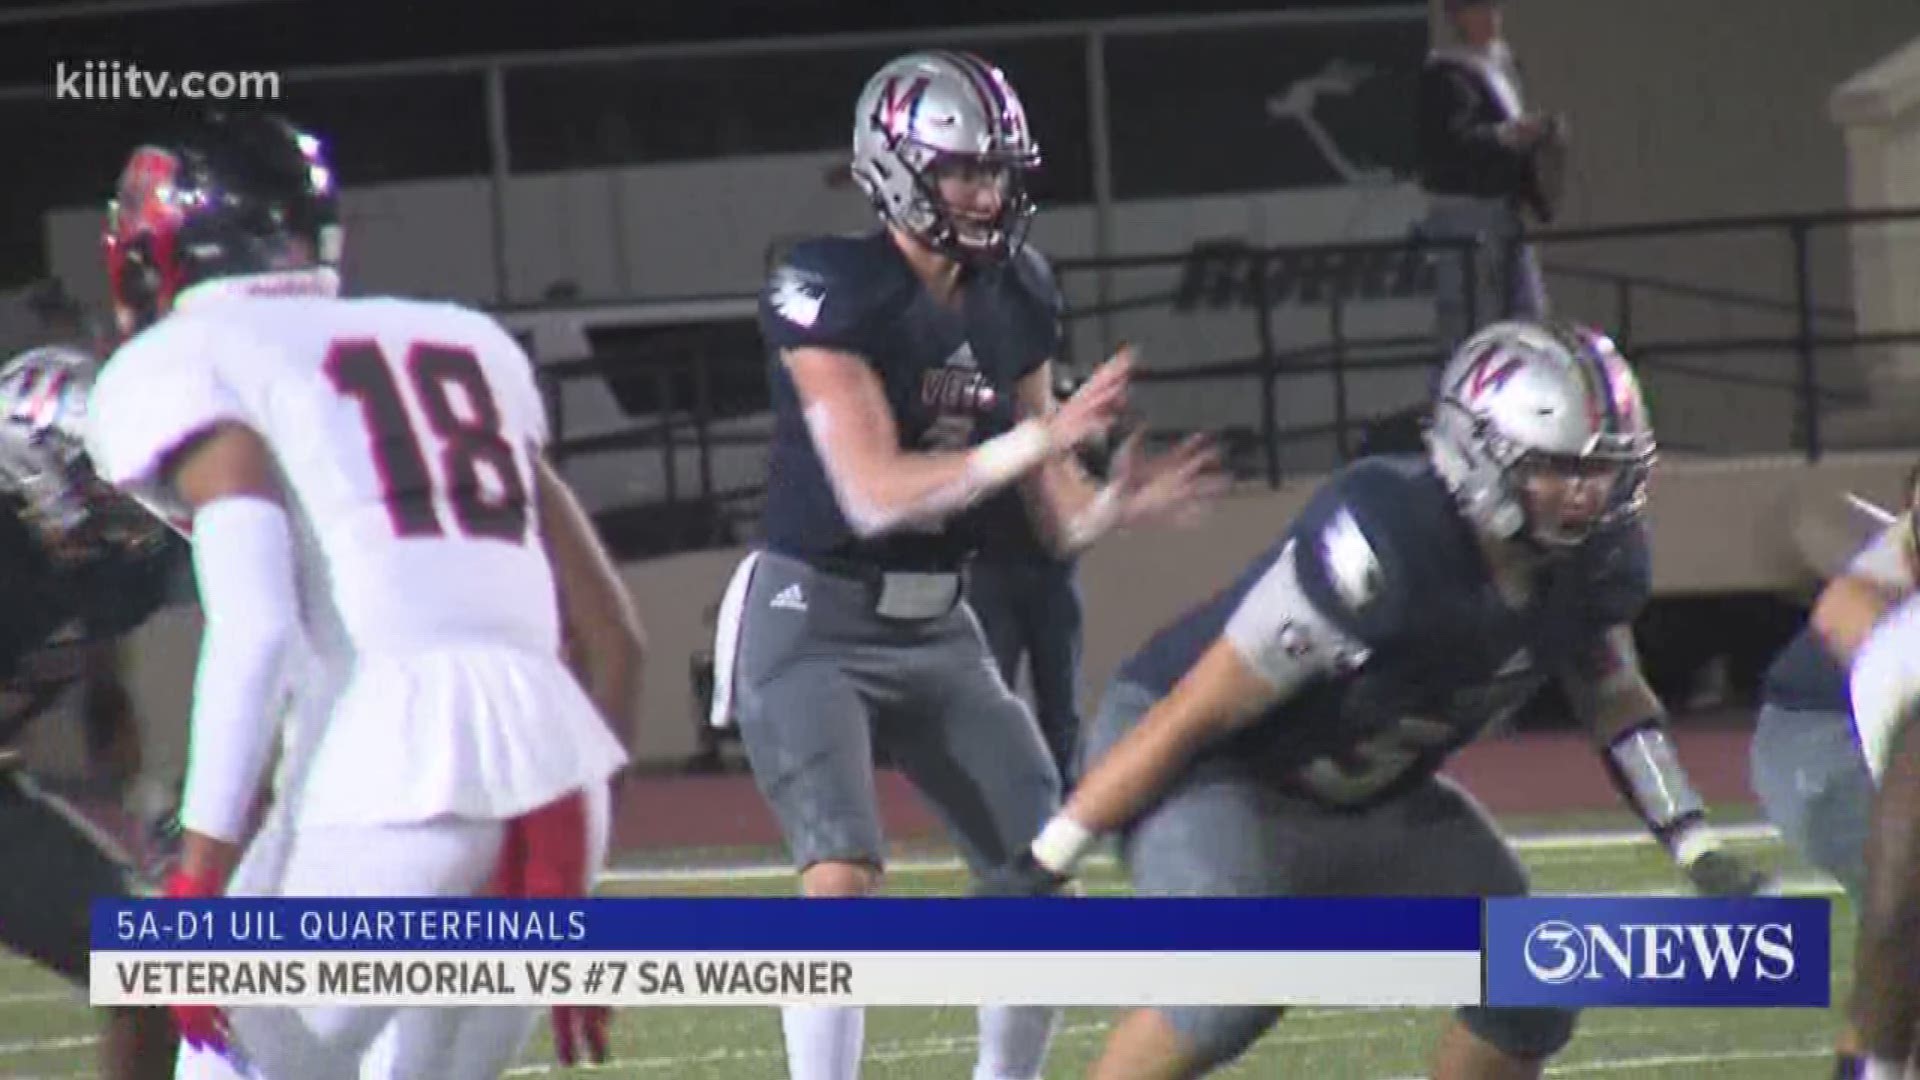 Veterans Memorial fell to No. 7 San Antonio Wagner who put on an offensive show at Buc Stadium 74-14.